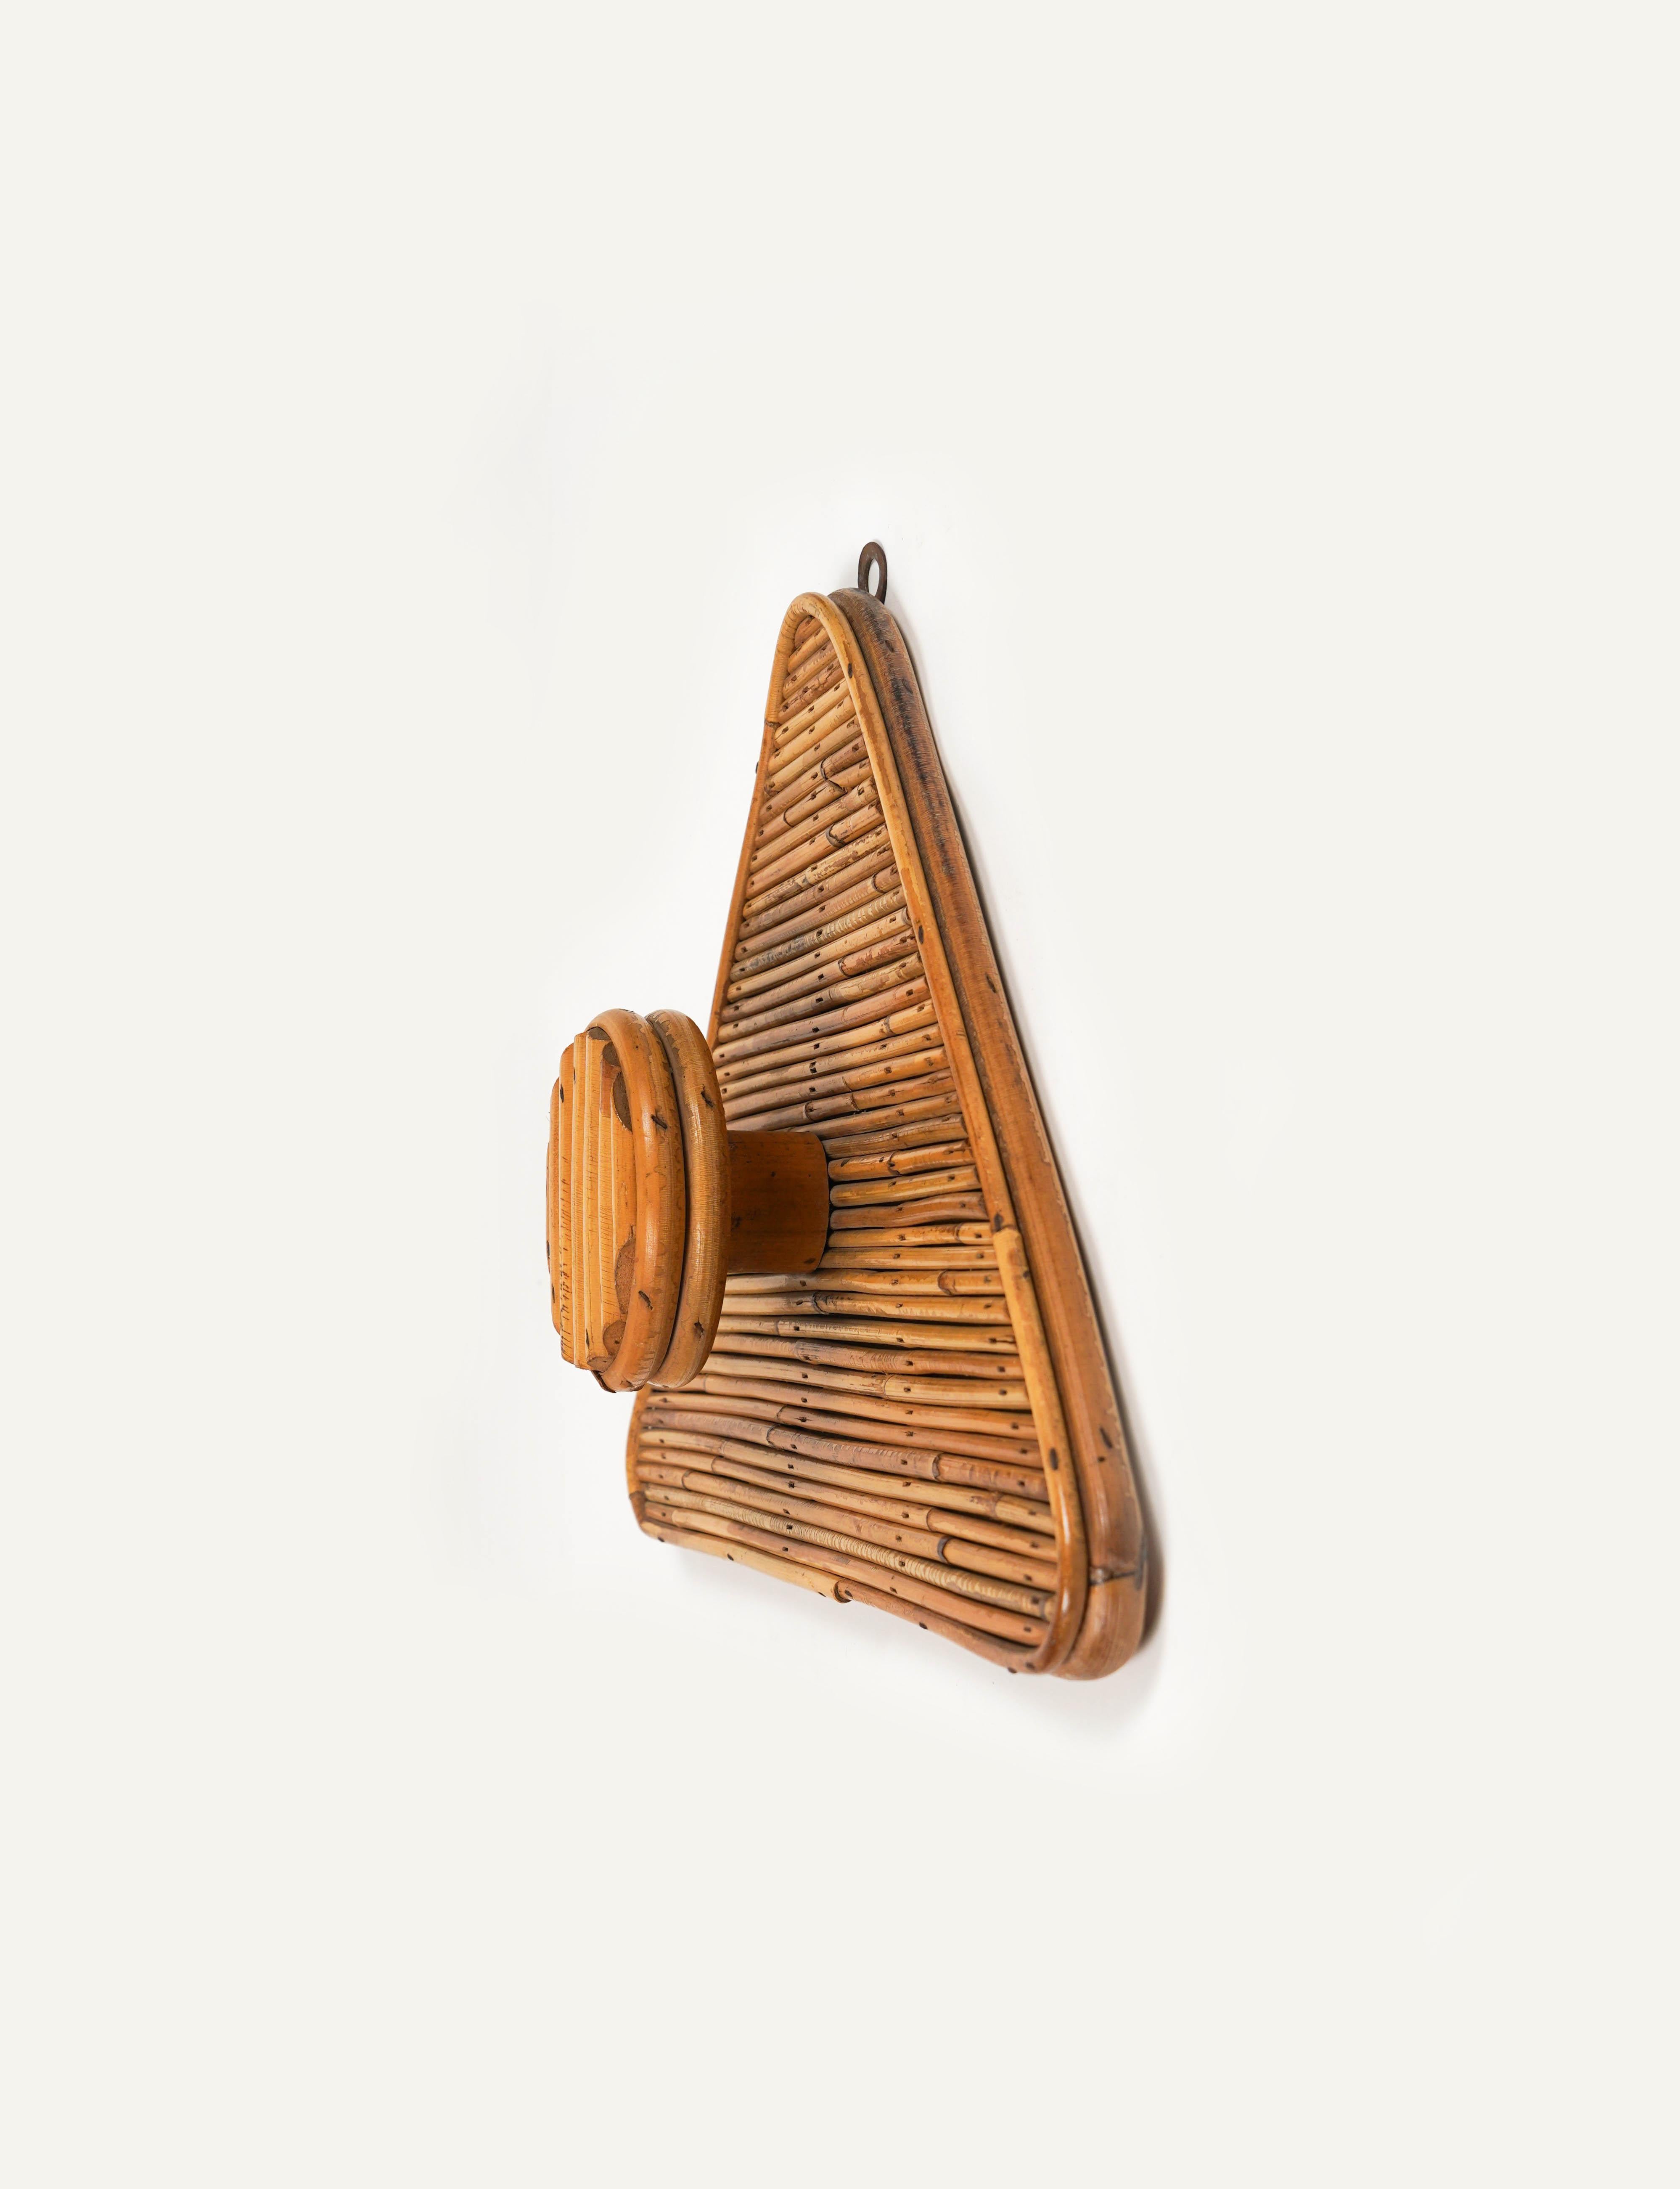 Bamboo and Rattan Triangular Coat Rack Stand Vivai Del Sud Style, Italy 1960s For Sale 2